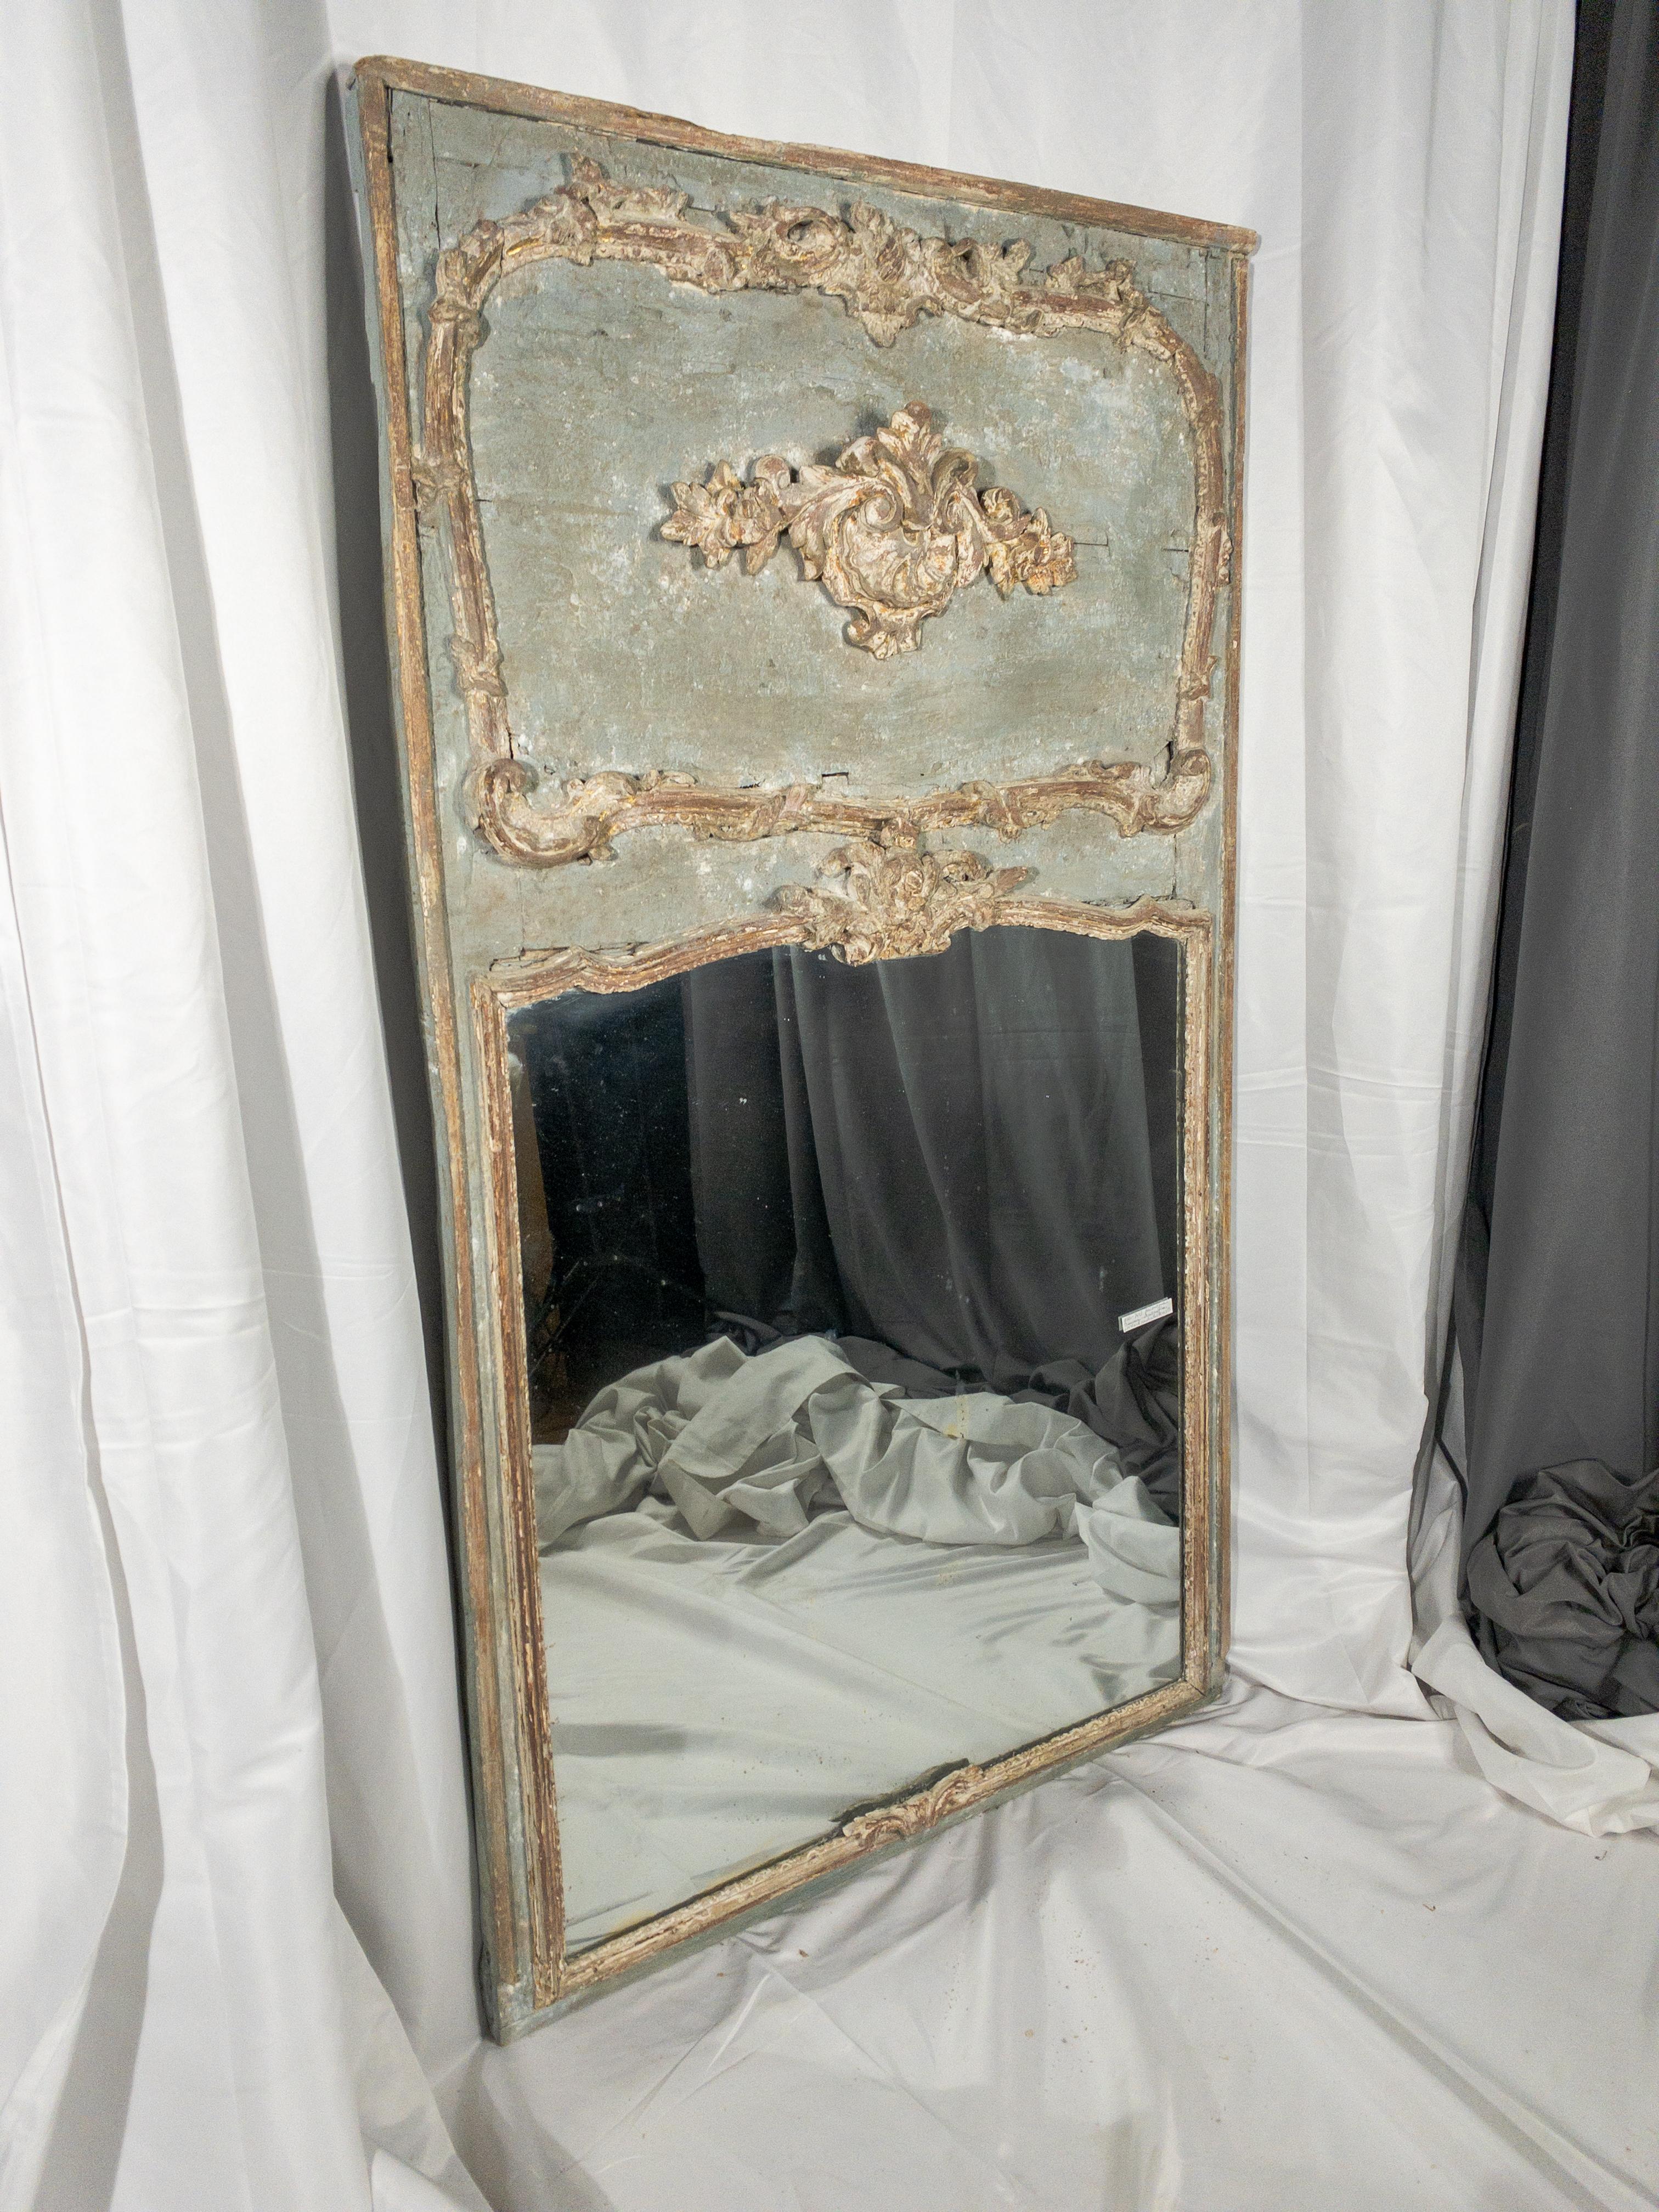 The 19th Century Regence Style Painted Trumeau Mirror epitomizes the sophistication and opulence of its era. Its intricate carvings, adorned with raised decorations delicately accented with traces of gilt, speak to the refined craftsmanship and